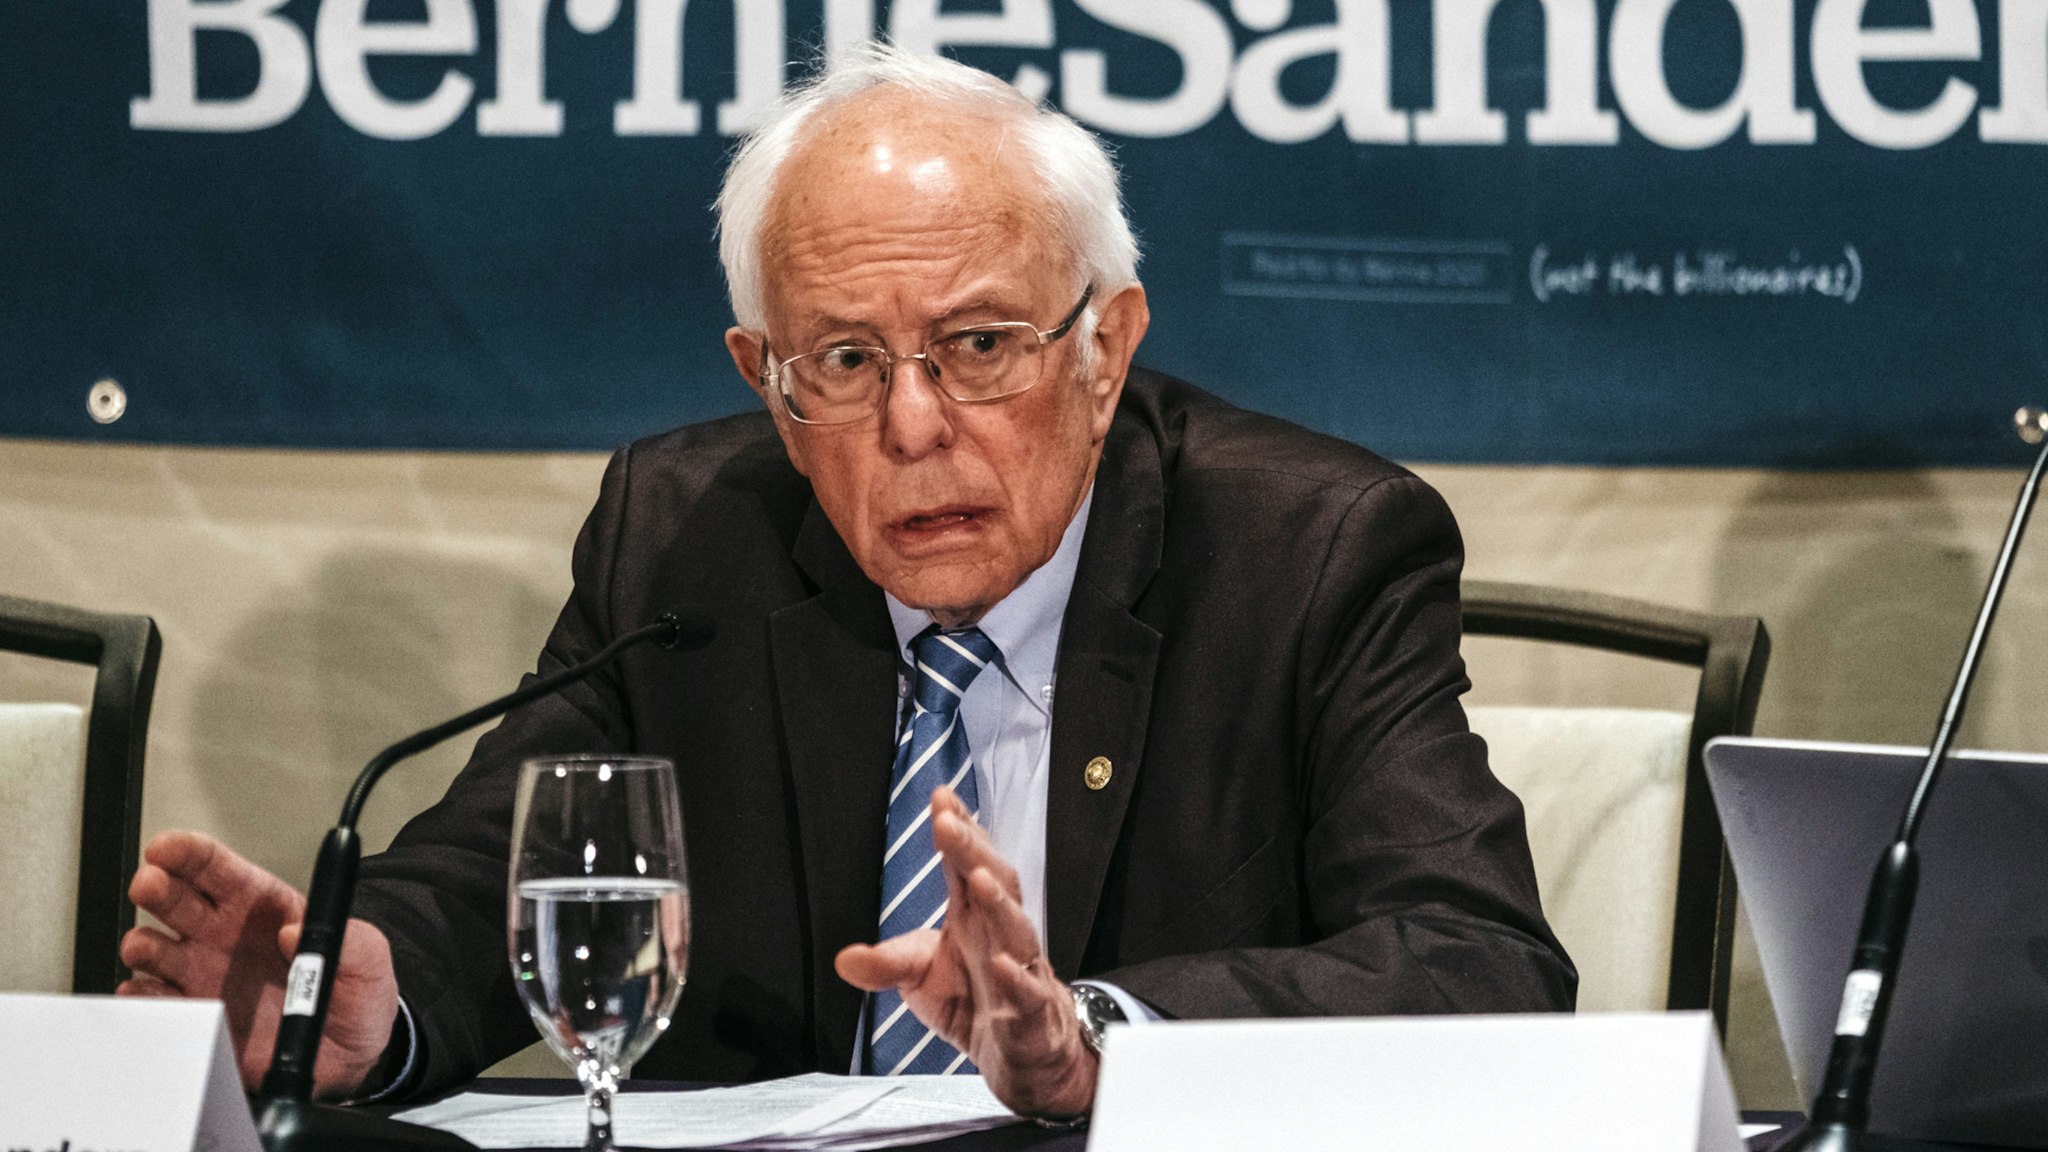 Senator Bernie Sanders, an Independent from Vermont and 2020 presidential candidate, speaks during a coronavirus public health roundtable in Romulus, Michigan, U.S., on Monday, March 9, 2020. Sanders said any eventual vaccine for the deadly novel coronavirus should be made available free of charge once developed and approved for use.